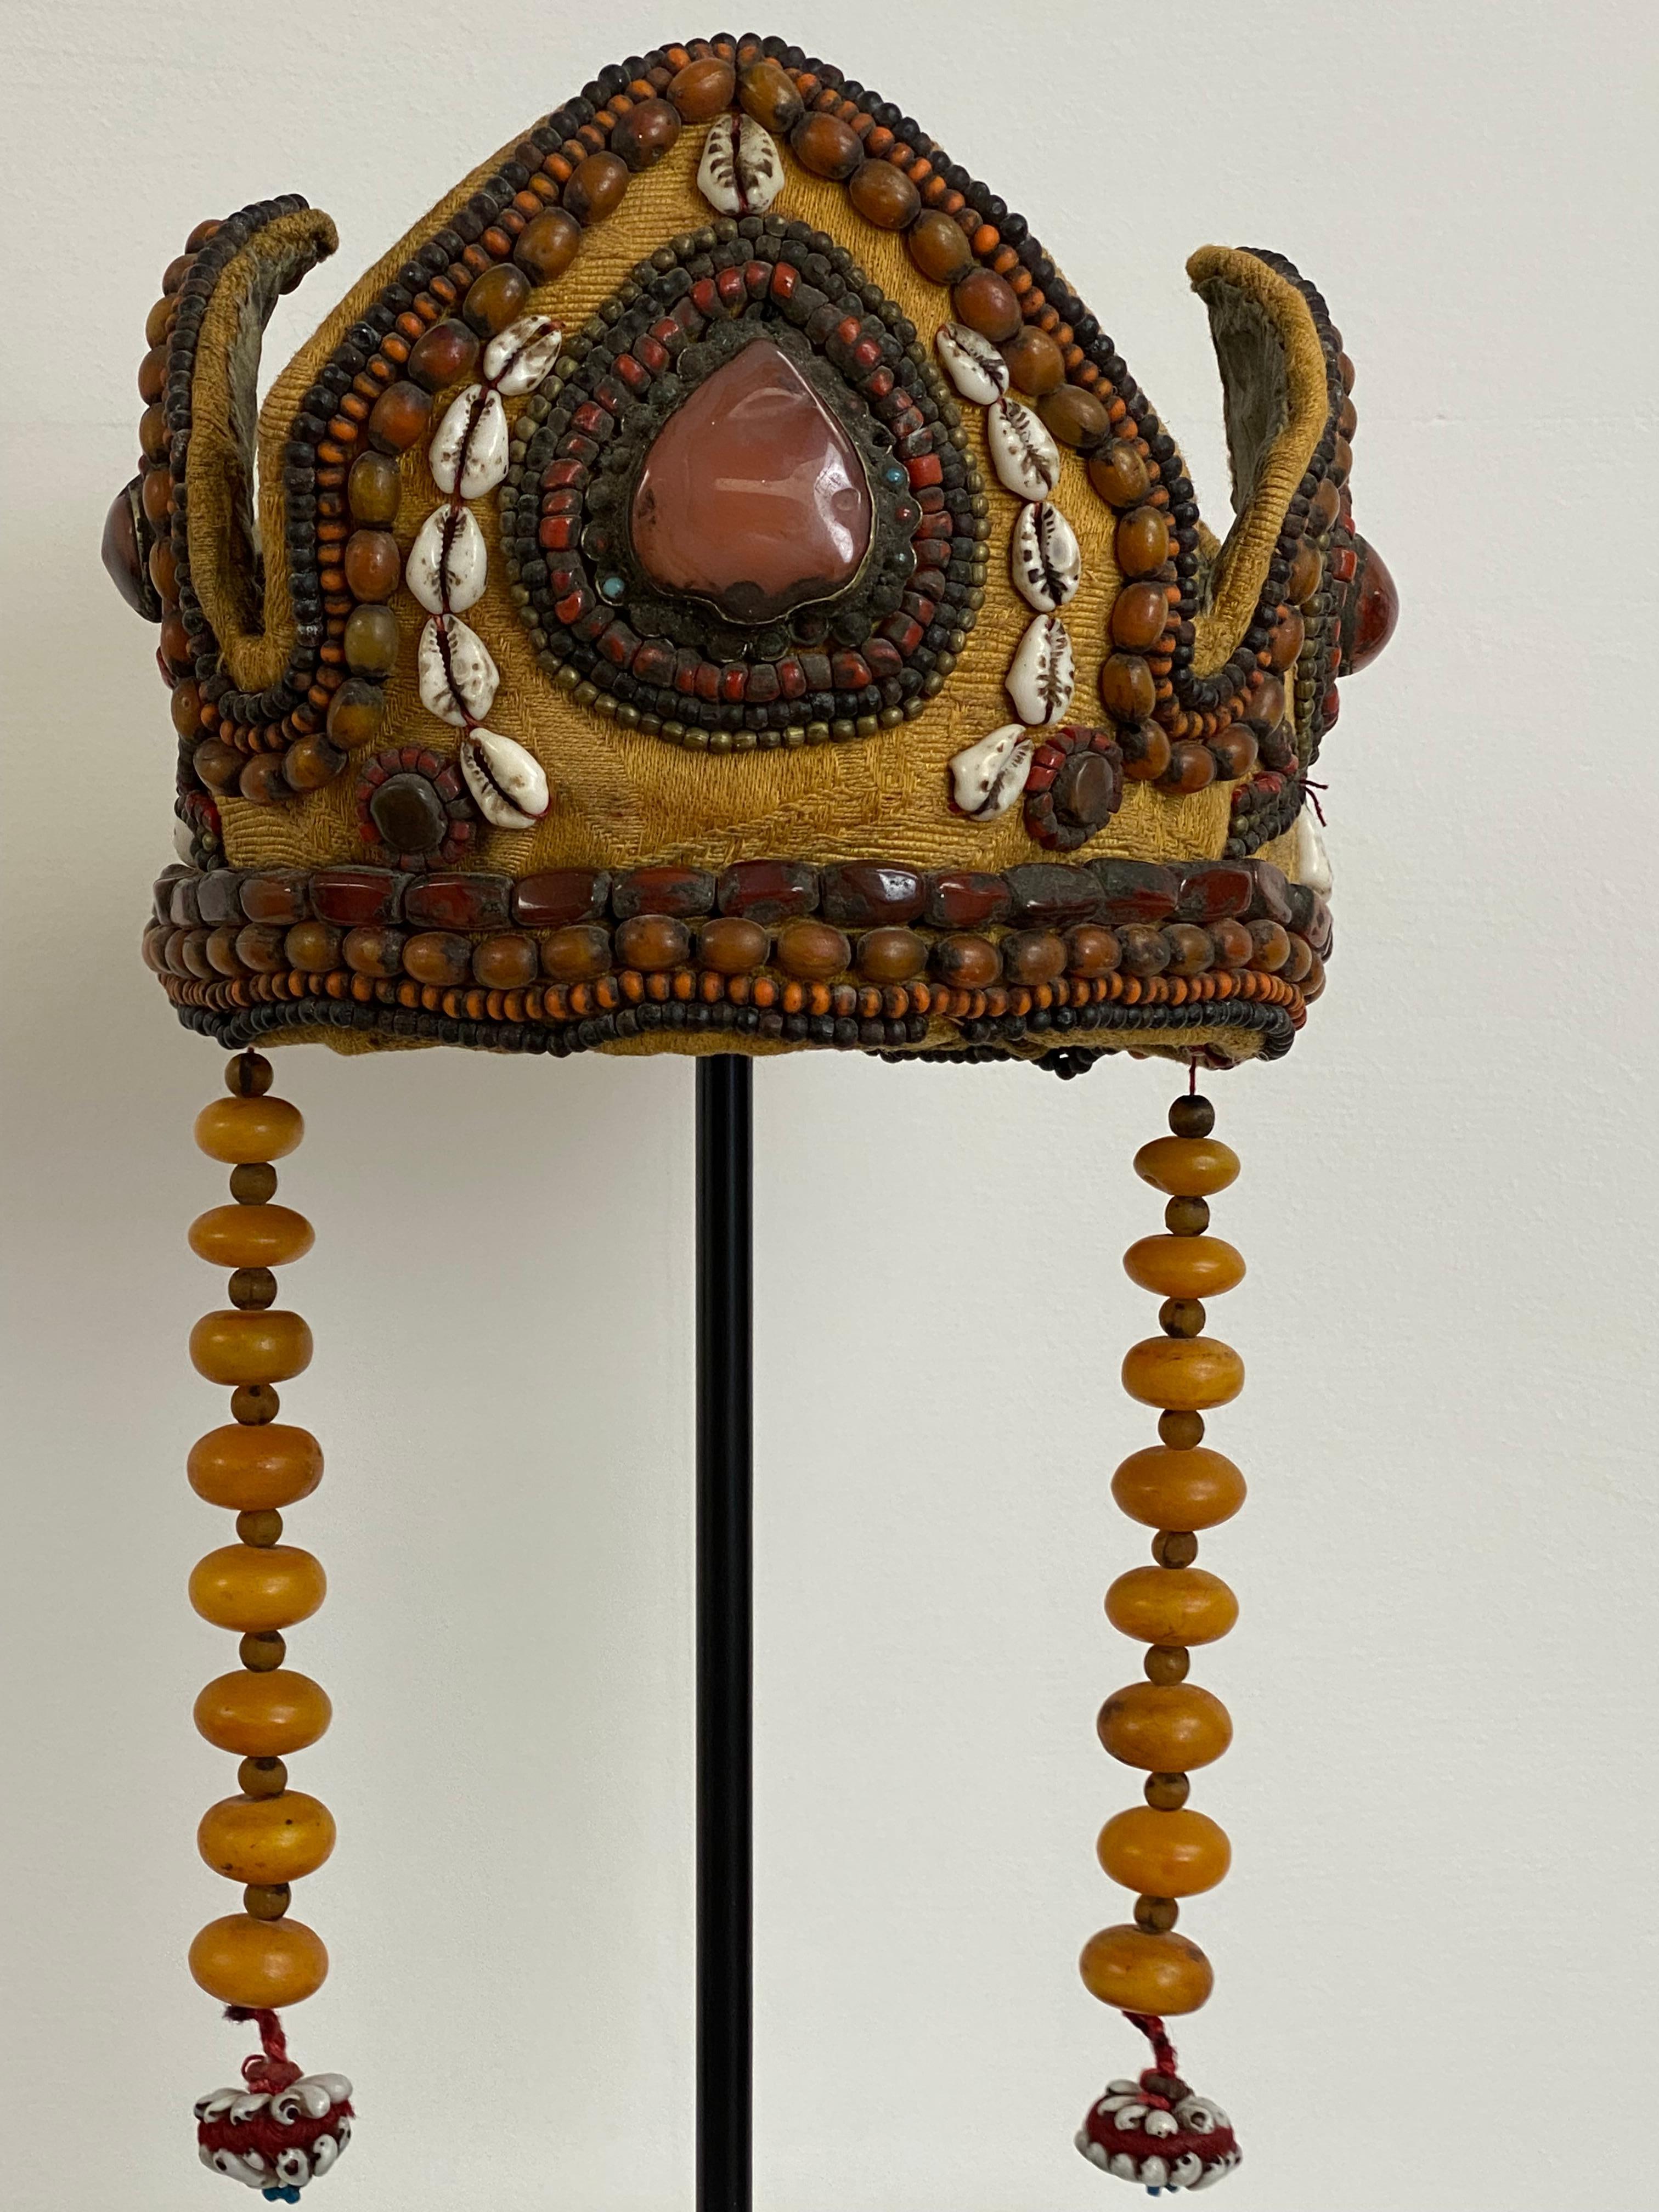 Exceptional Antique Tibetan Parure made of a Head Ornament and Collier 13